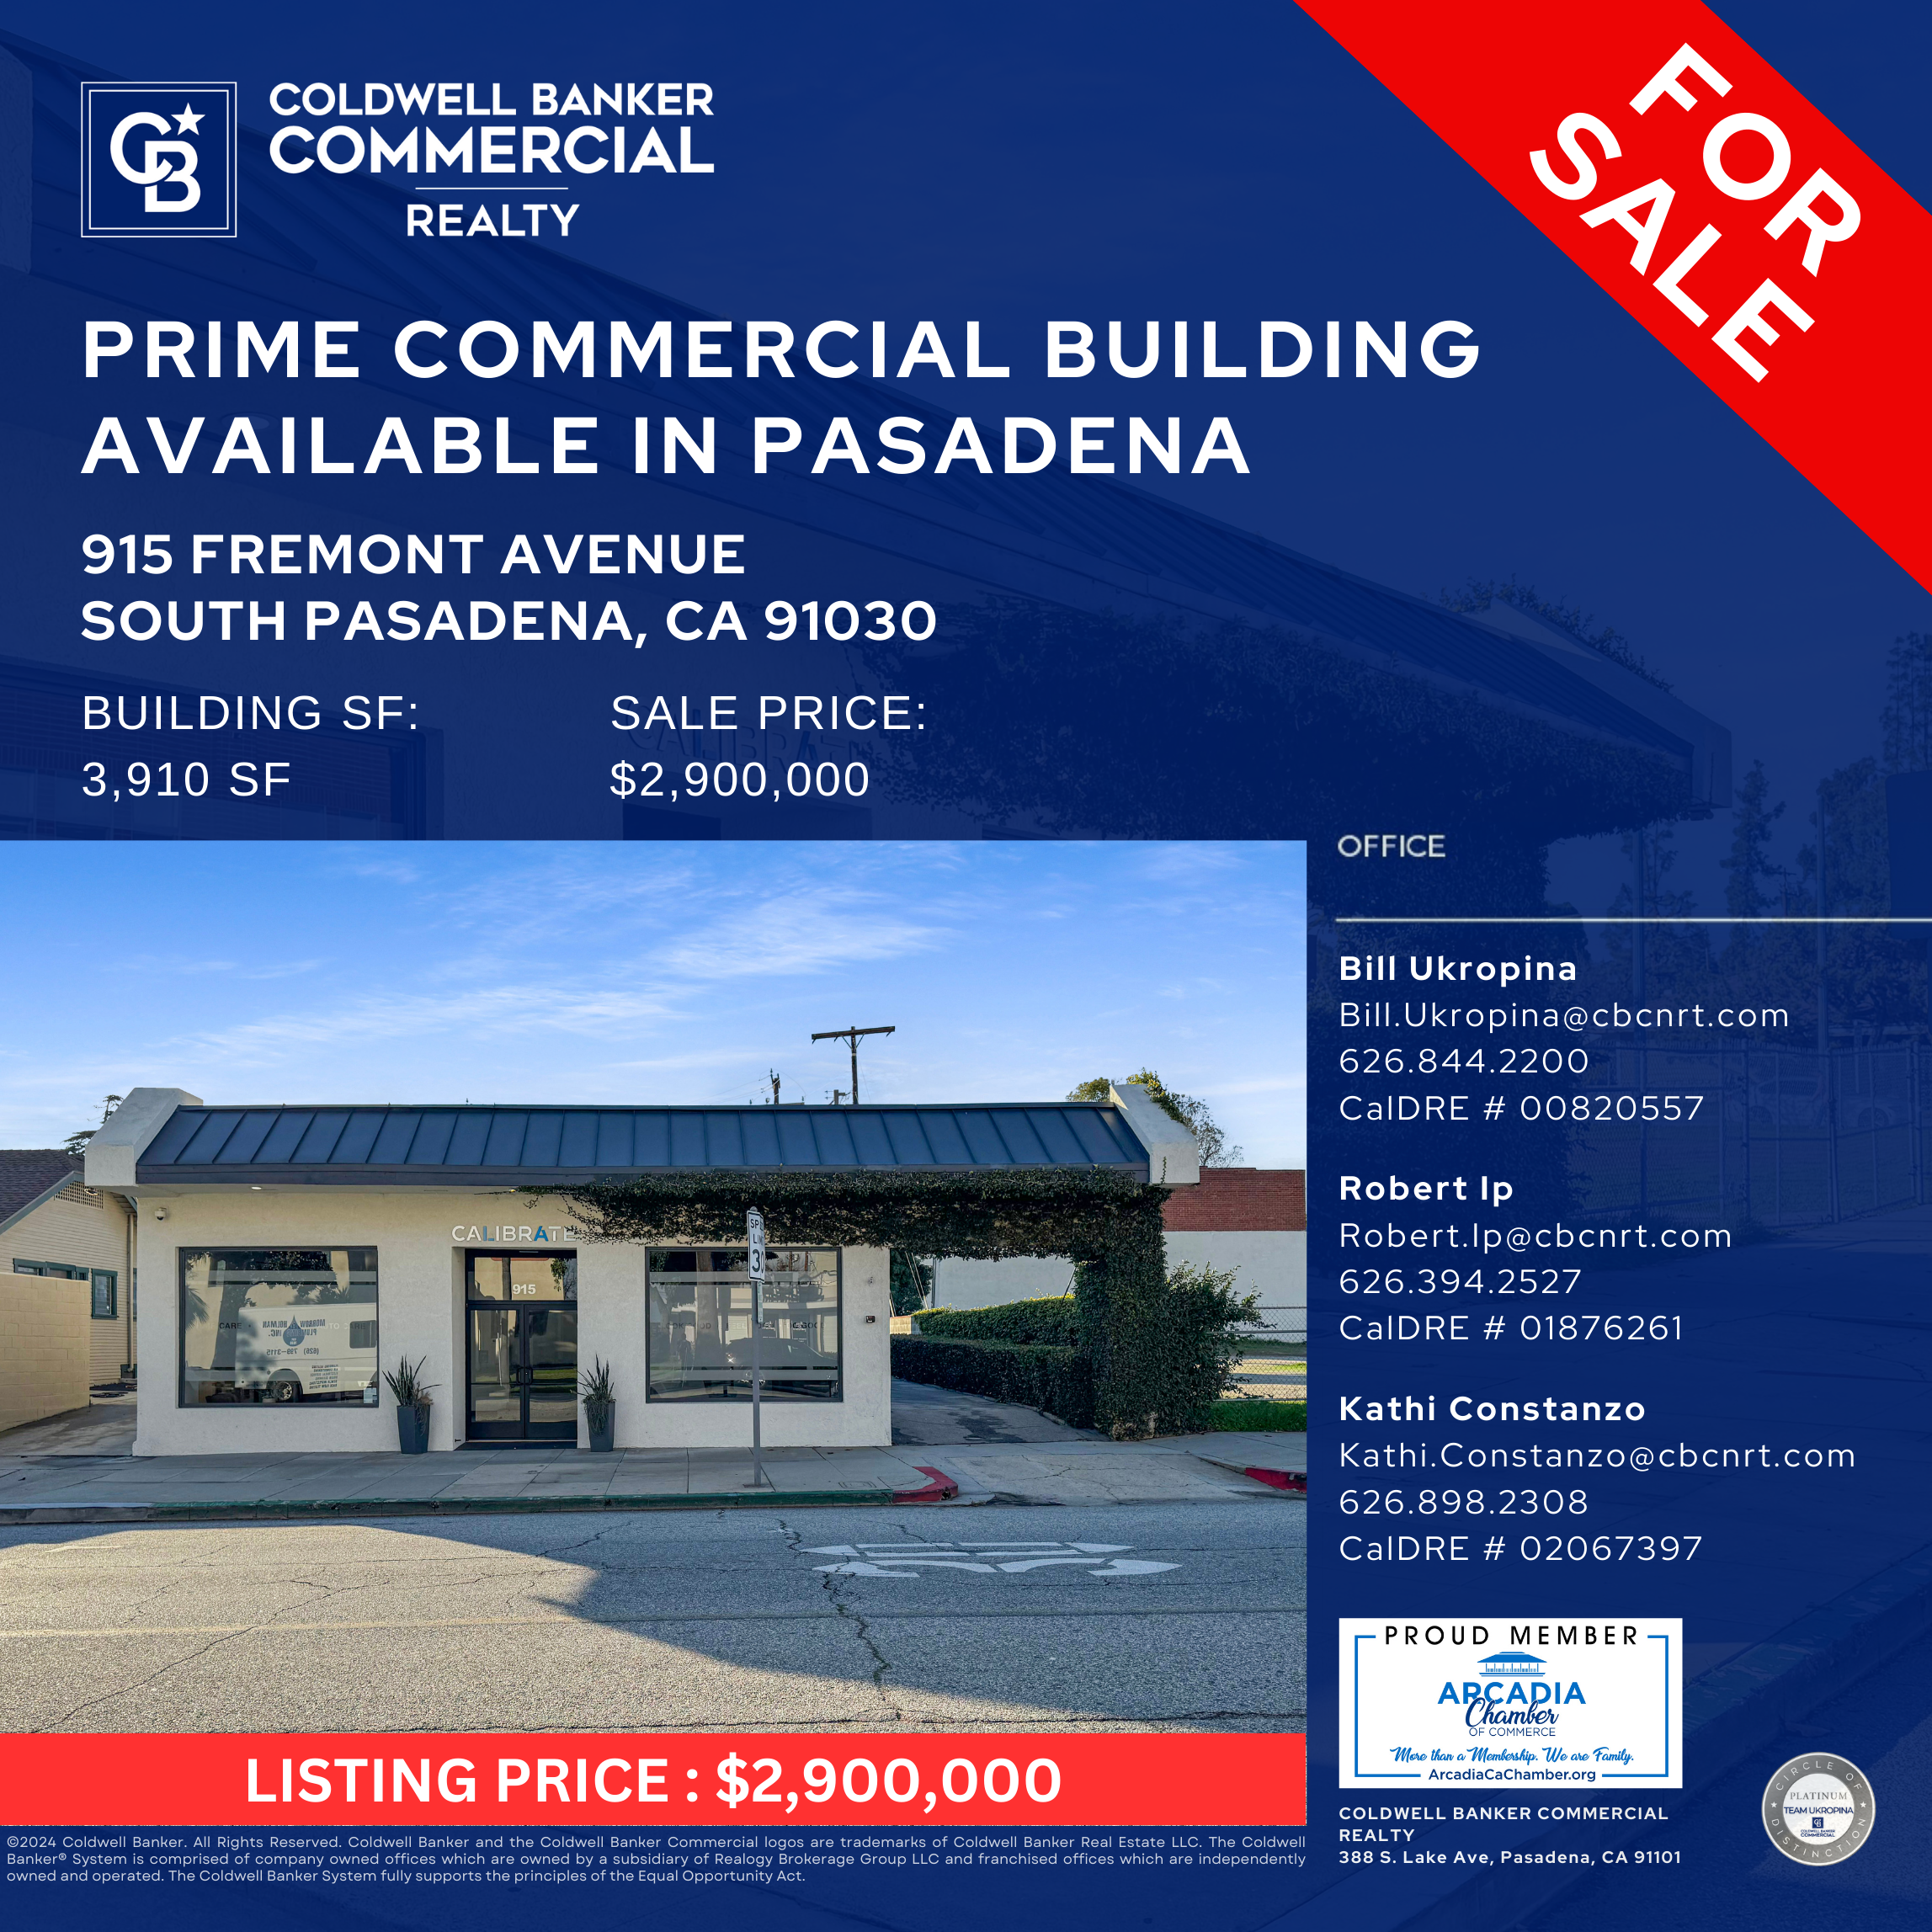 915 S Fremont Ave in South Pasadena Commercial Building for sale from Coldwell Commercial